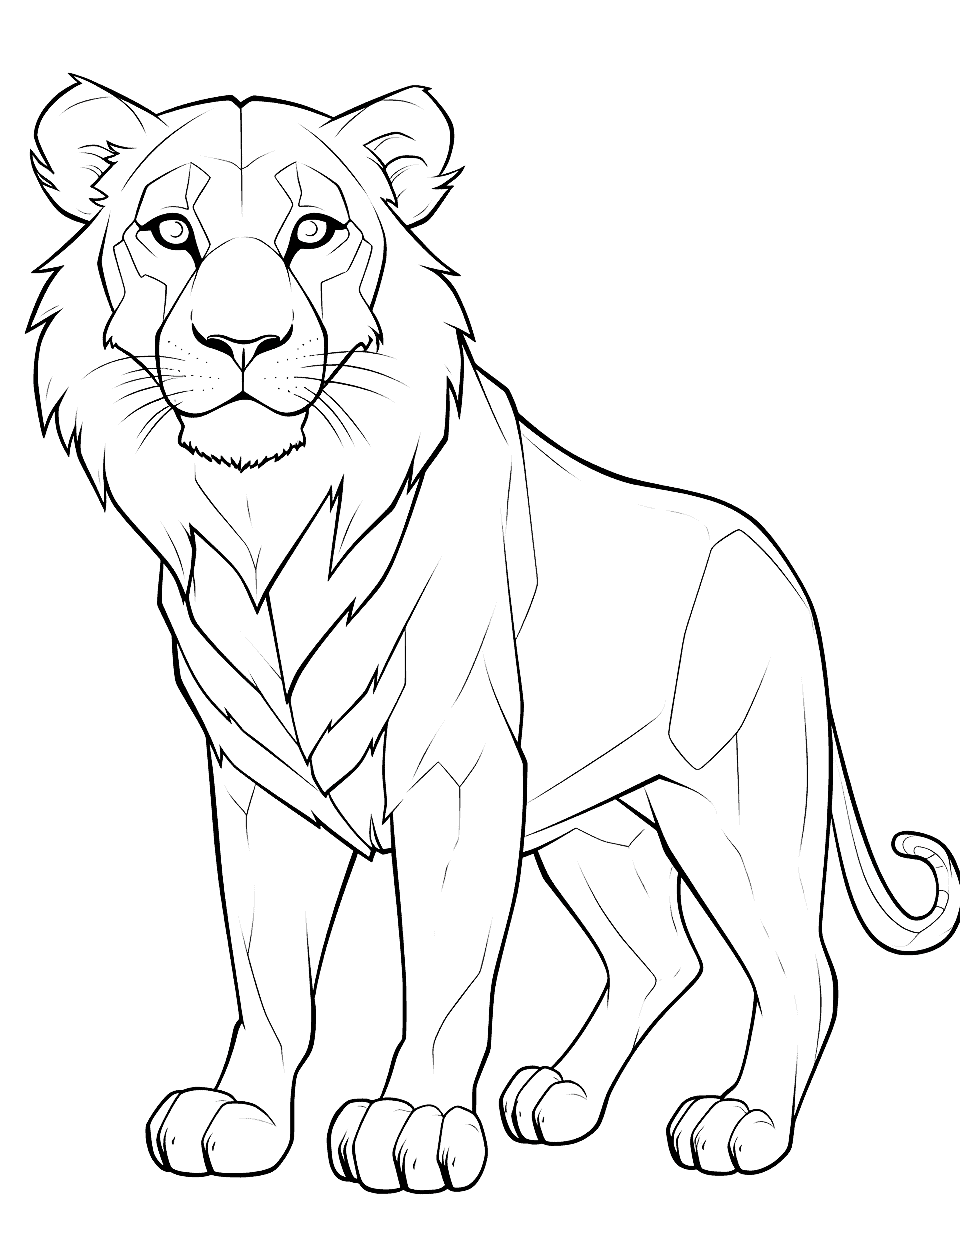 Brave Lion Animal Coloring Page - A male lion with a strong and determined expression.